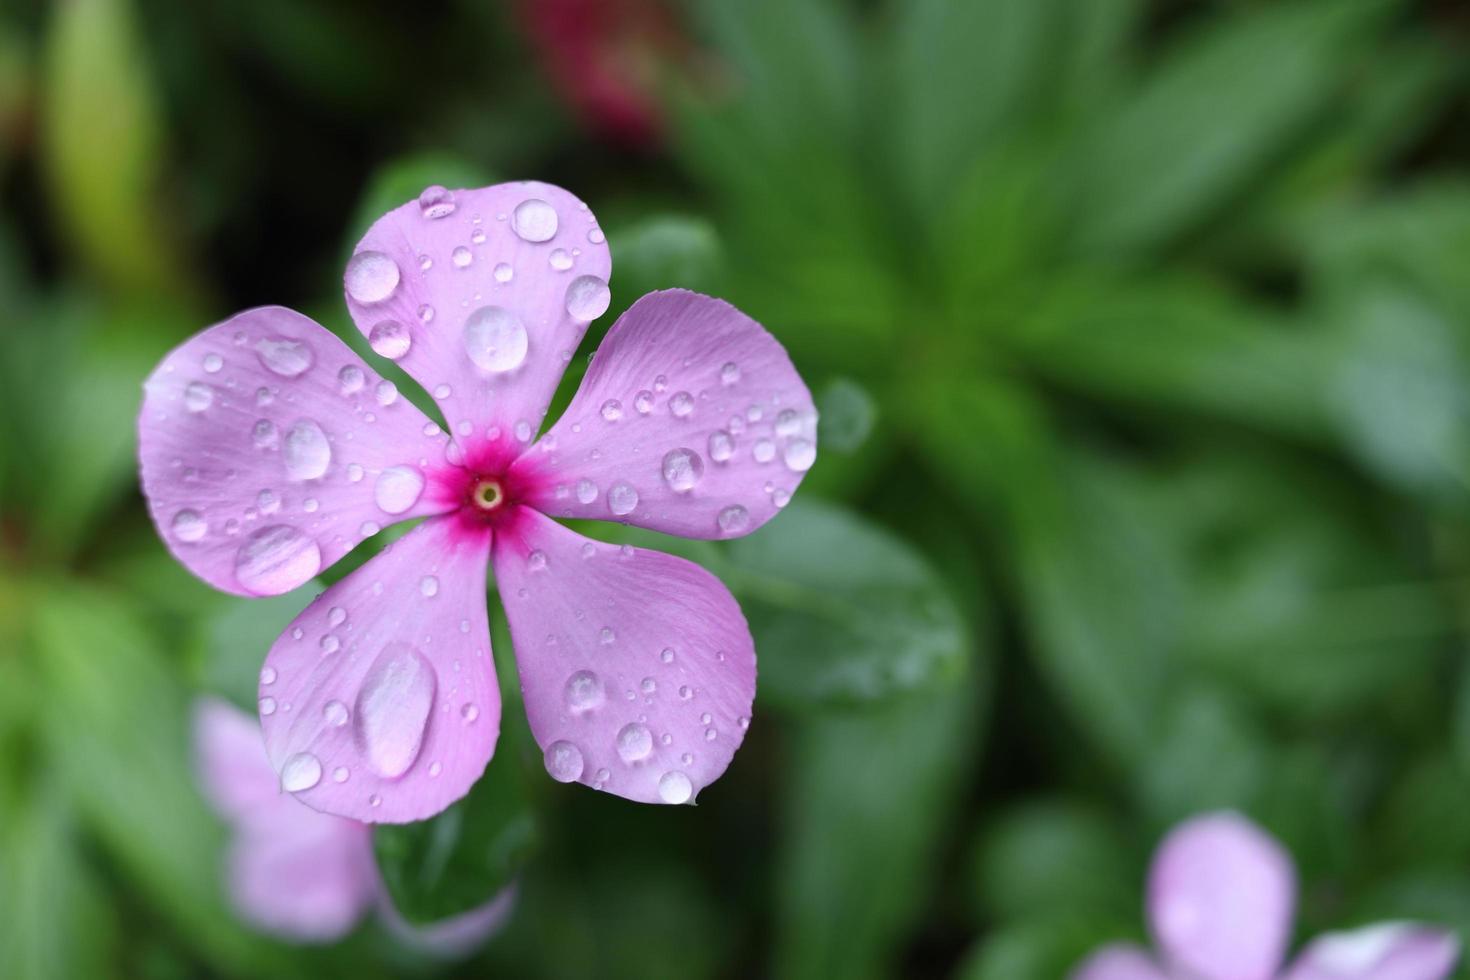 Top view of pink flower of Madagascar Periwinkle with droplets on petal and blur background. Another name is West Indian Periwinkle, Indian Periwinkle, Pink Periwinkle, Old Maid, Vinca. photo